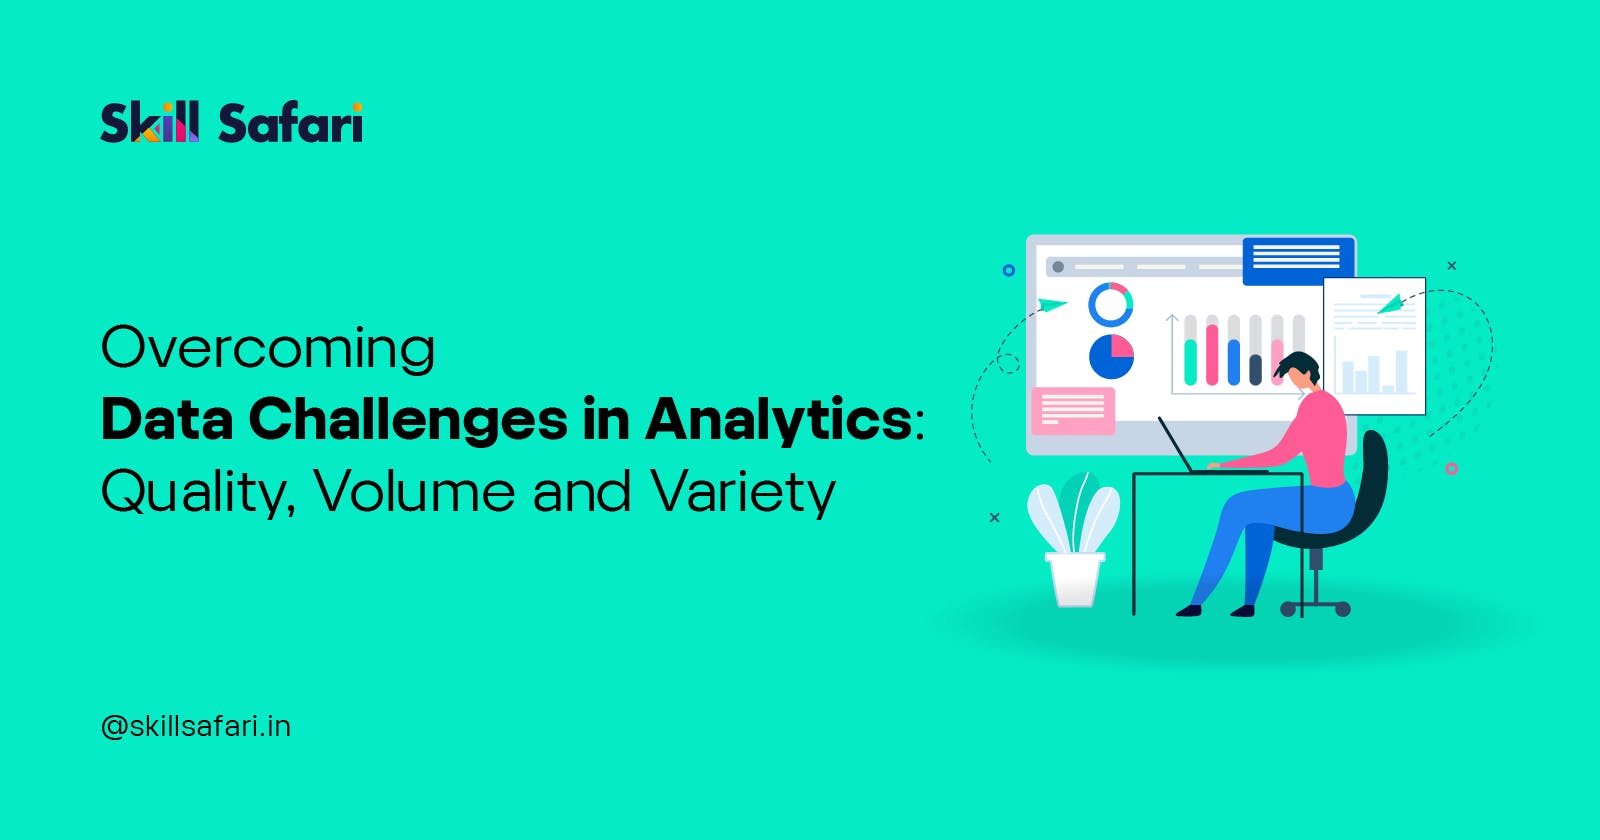 Overcoming Data Challenges in Analytics: Quality, Volume and Variety